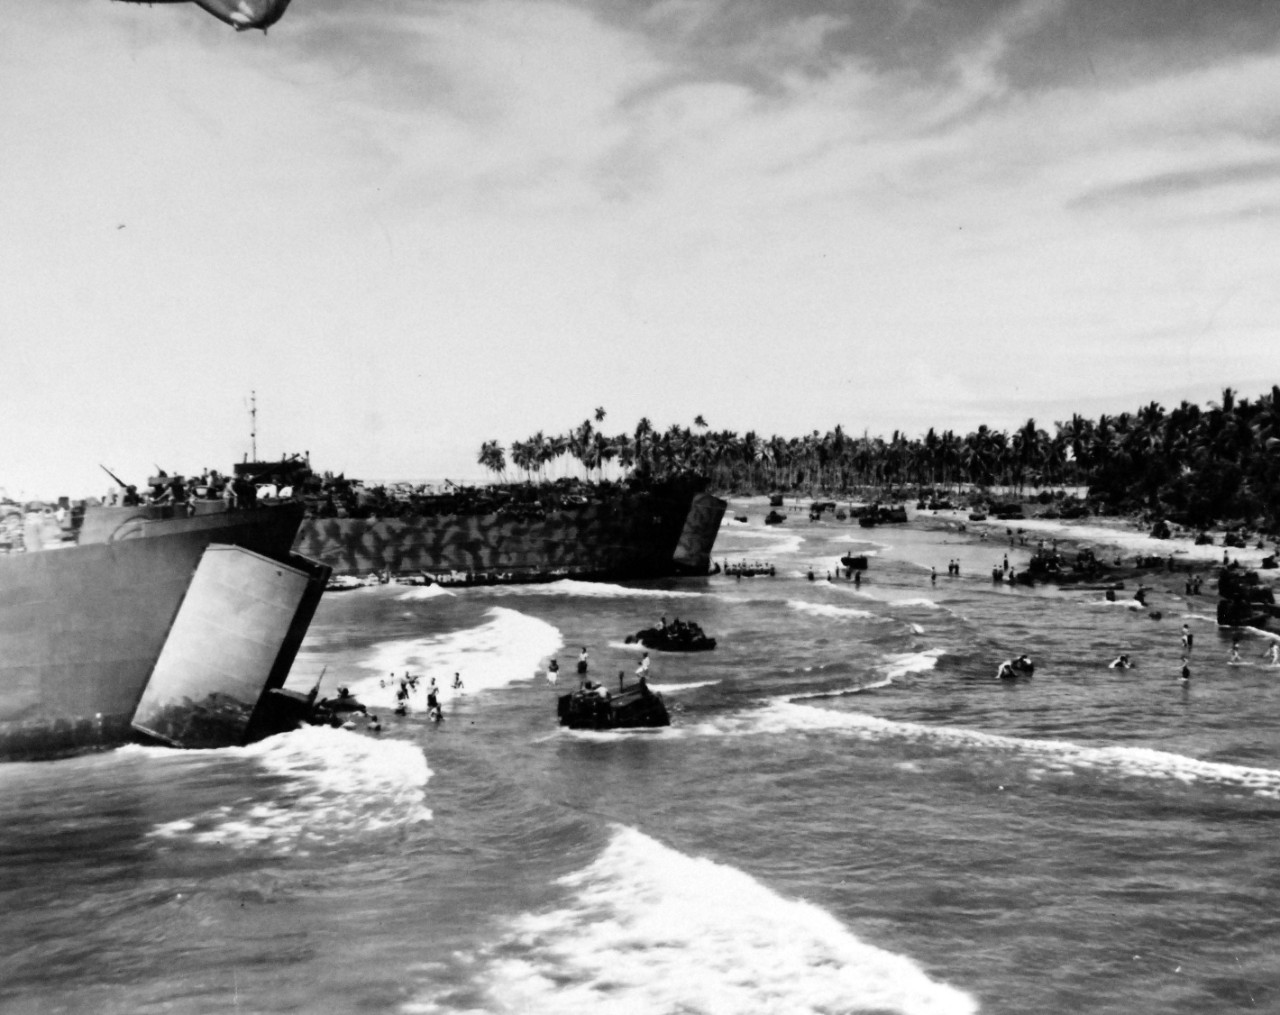 80-G-202489:  Bougainville Campaign, November 1943-August 1945.     Putting men and supplies ashore at Empress Augusta Bay, Bougainville Island.  Shown:  Unloading heavy equipment on shallow beach.   Photographed November 6, 1943.  Official U.S. Navy Photograph, now in the collections of the National Archives.  (2018/02/21).  